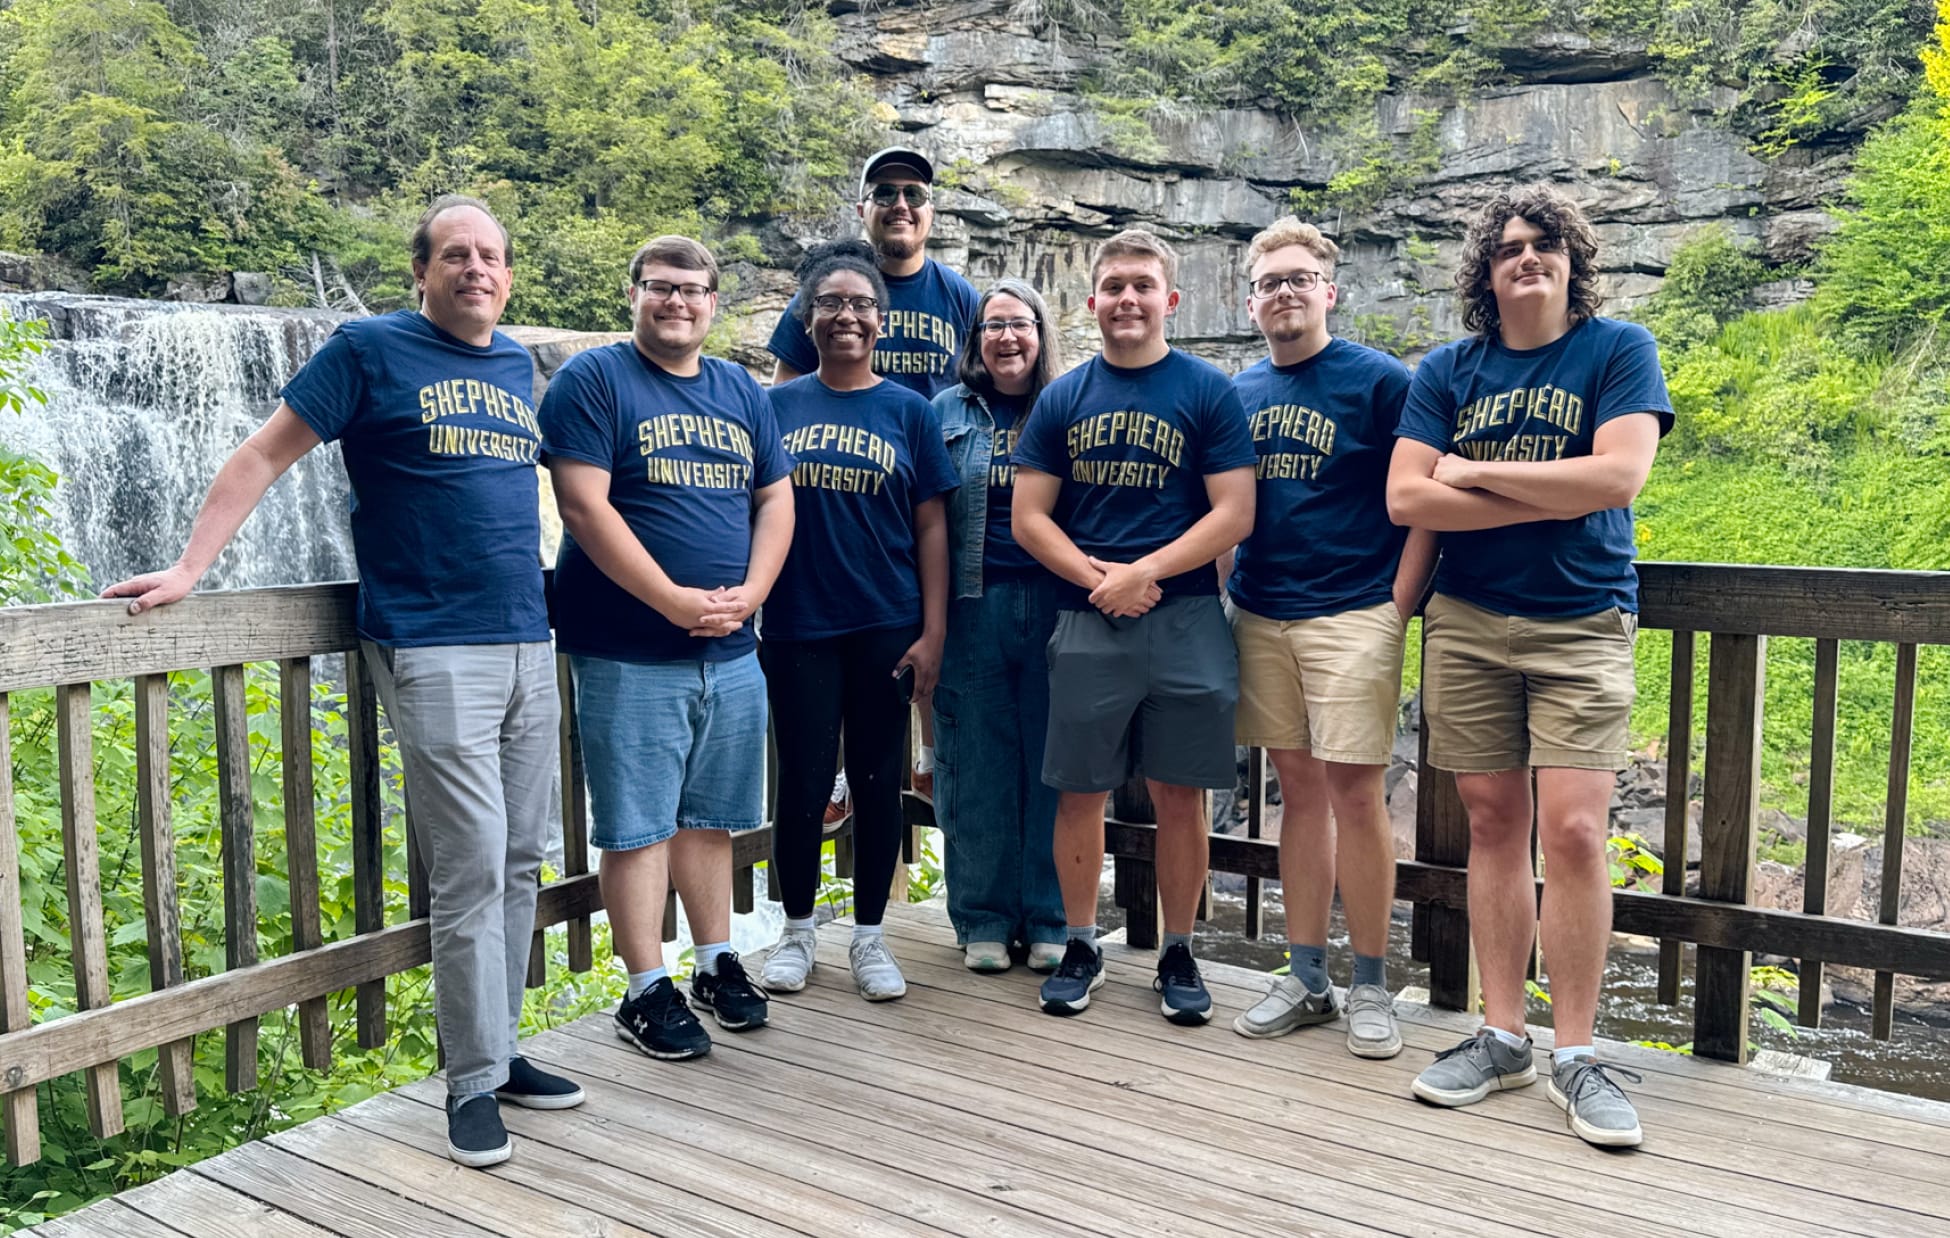 Our staff and SGA Executive Board enjoyed the Blackwater Falls views during the West Virginia Student Leadership Conference! Pictured (l. to r.): Jack Shaw, associate vice president of campus services; Paul Teter, SGA president; Natalea Johnson, SGA campus relations officer; Jim Ramey, student activities assistant; Rachael Meads, director of student activities and leadership; Tyler Furbee, SGA parliamentarian; Jackson Heath, SGA vice president; and LJ Kesner, SGA treasurer.